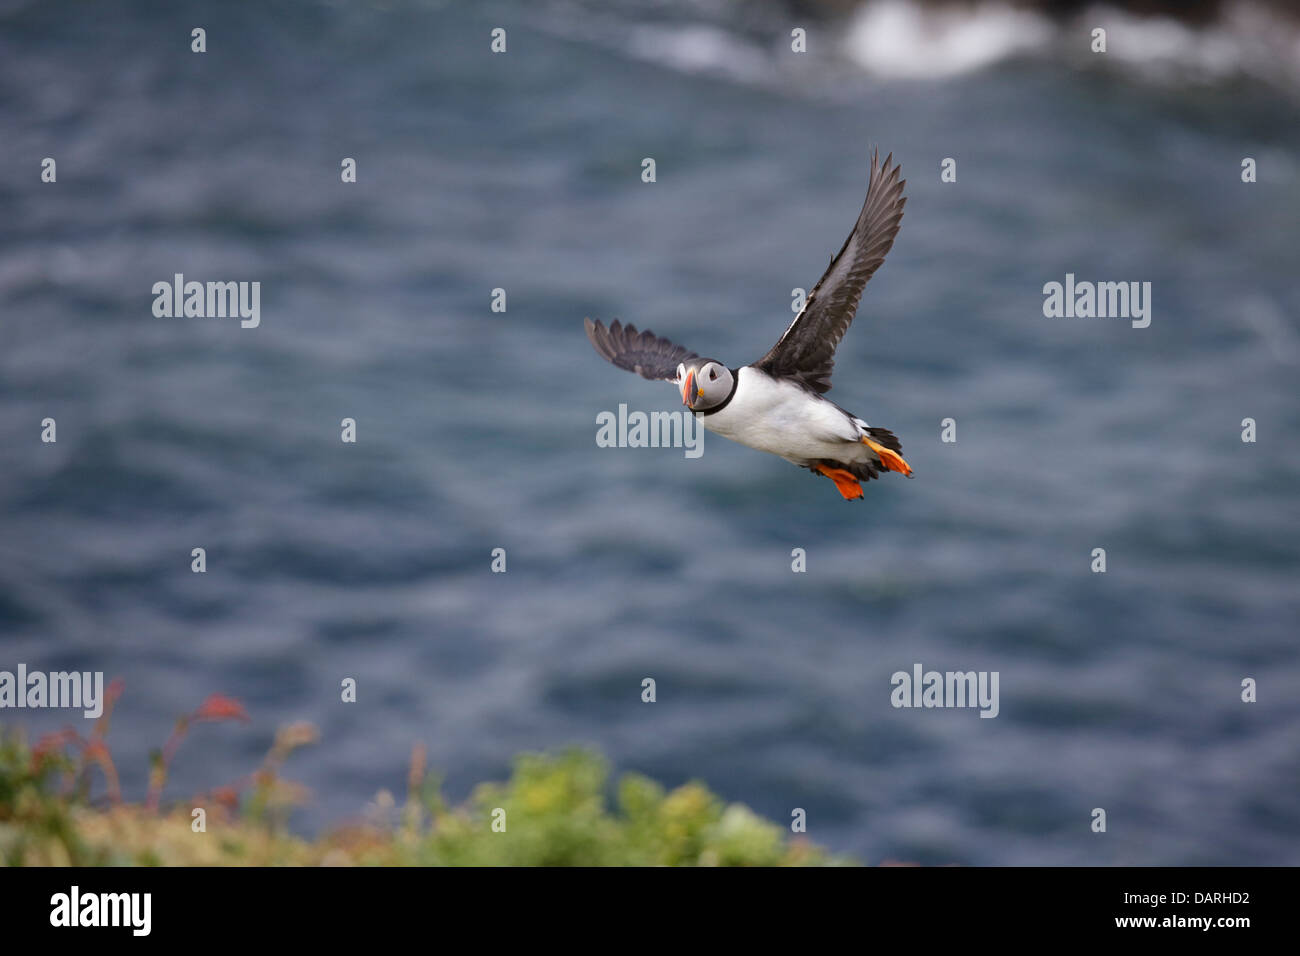 Puffin flying water Stock Photo